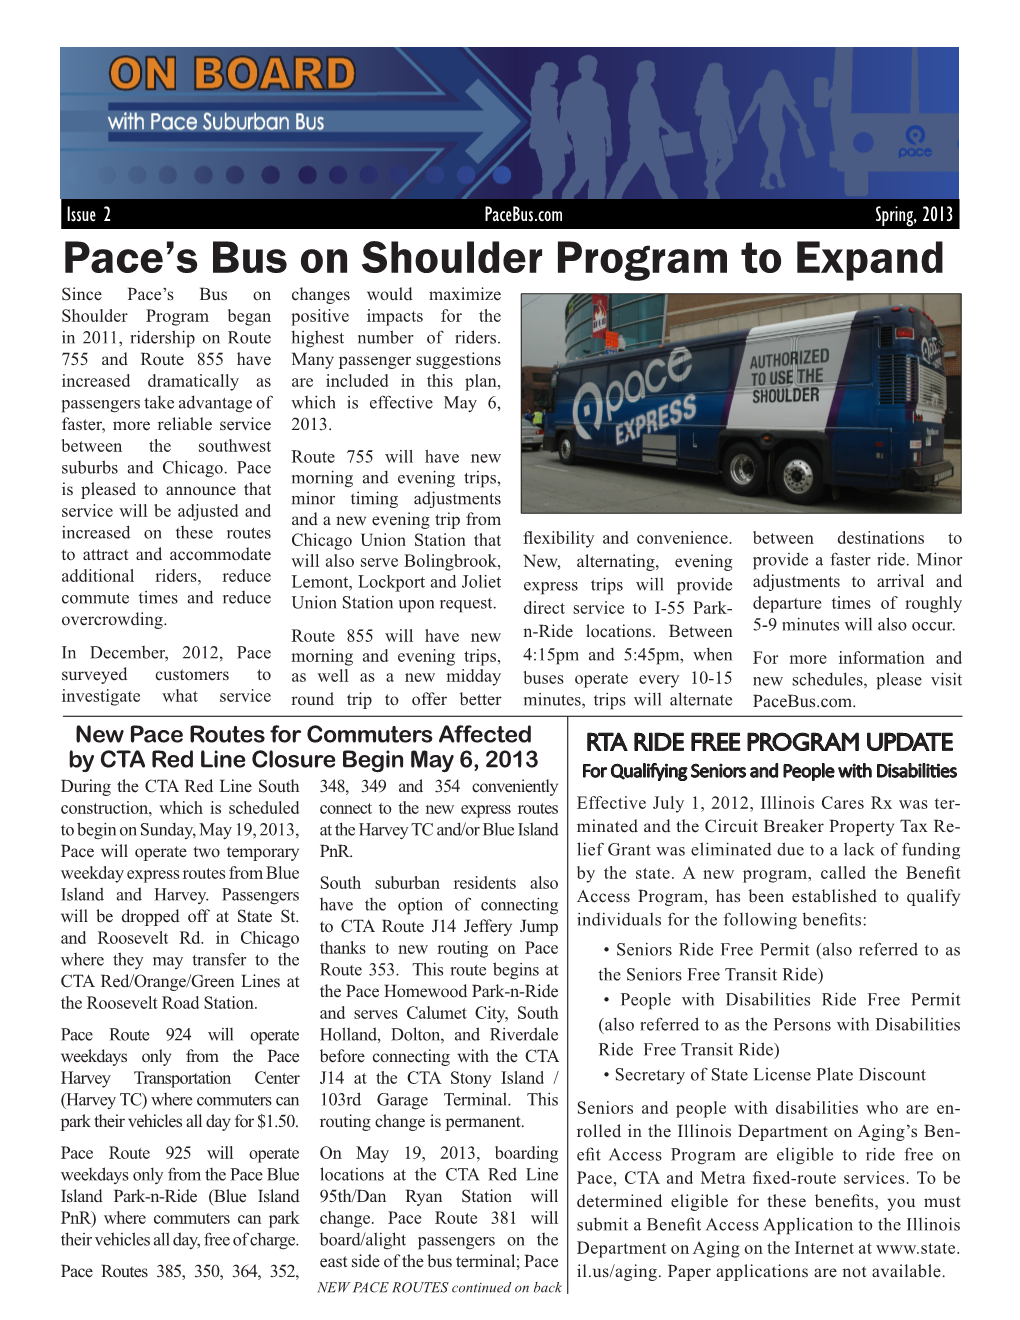 Pace's Bus on Shoulder Program to Expand